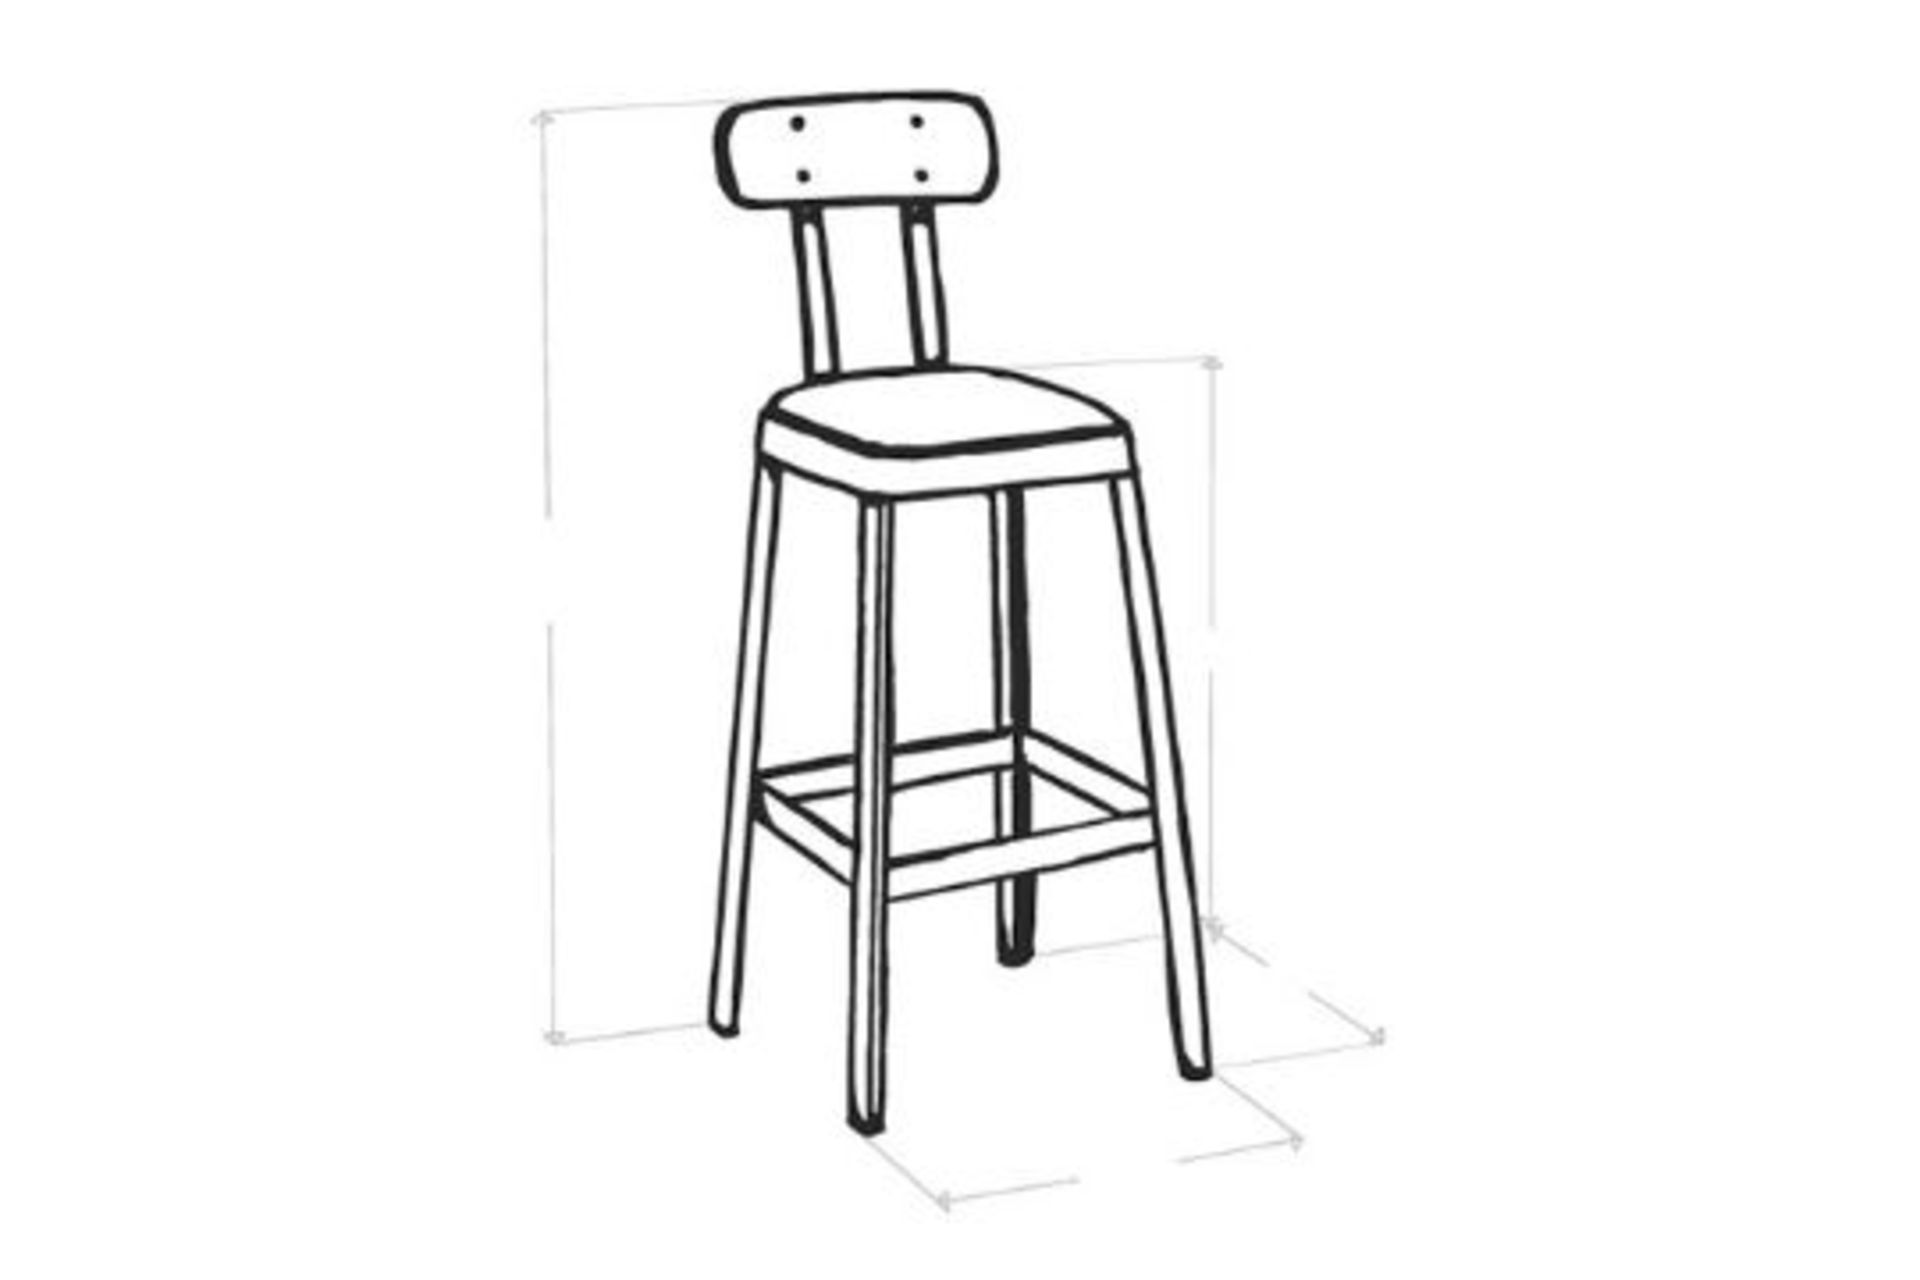 Lincoln Upholstered Seat Bar Stools - RRP £ 105.00 - Image 2 of 2